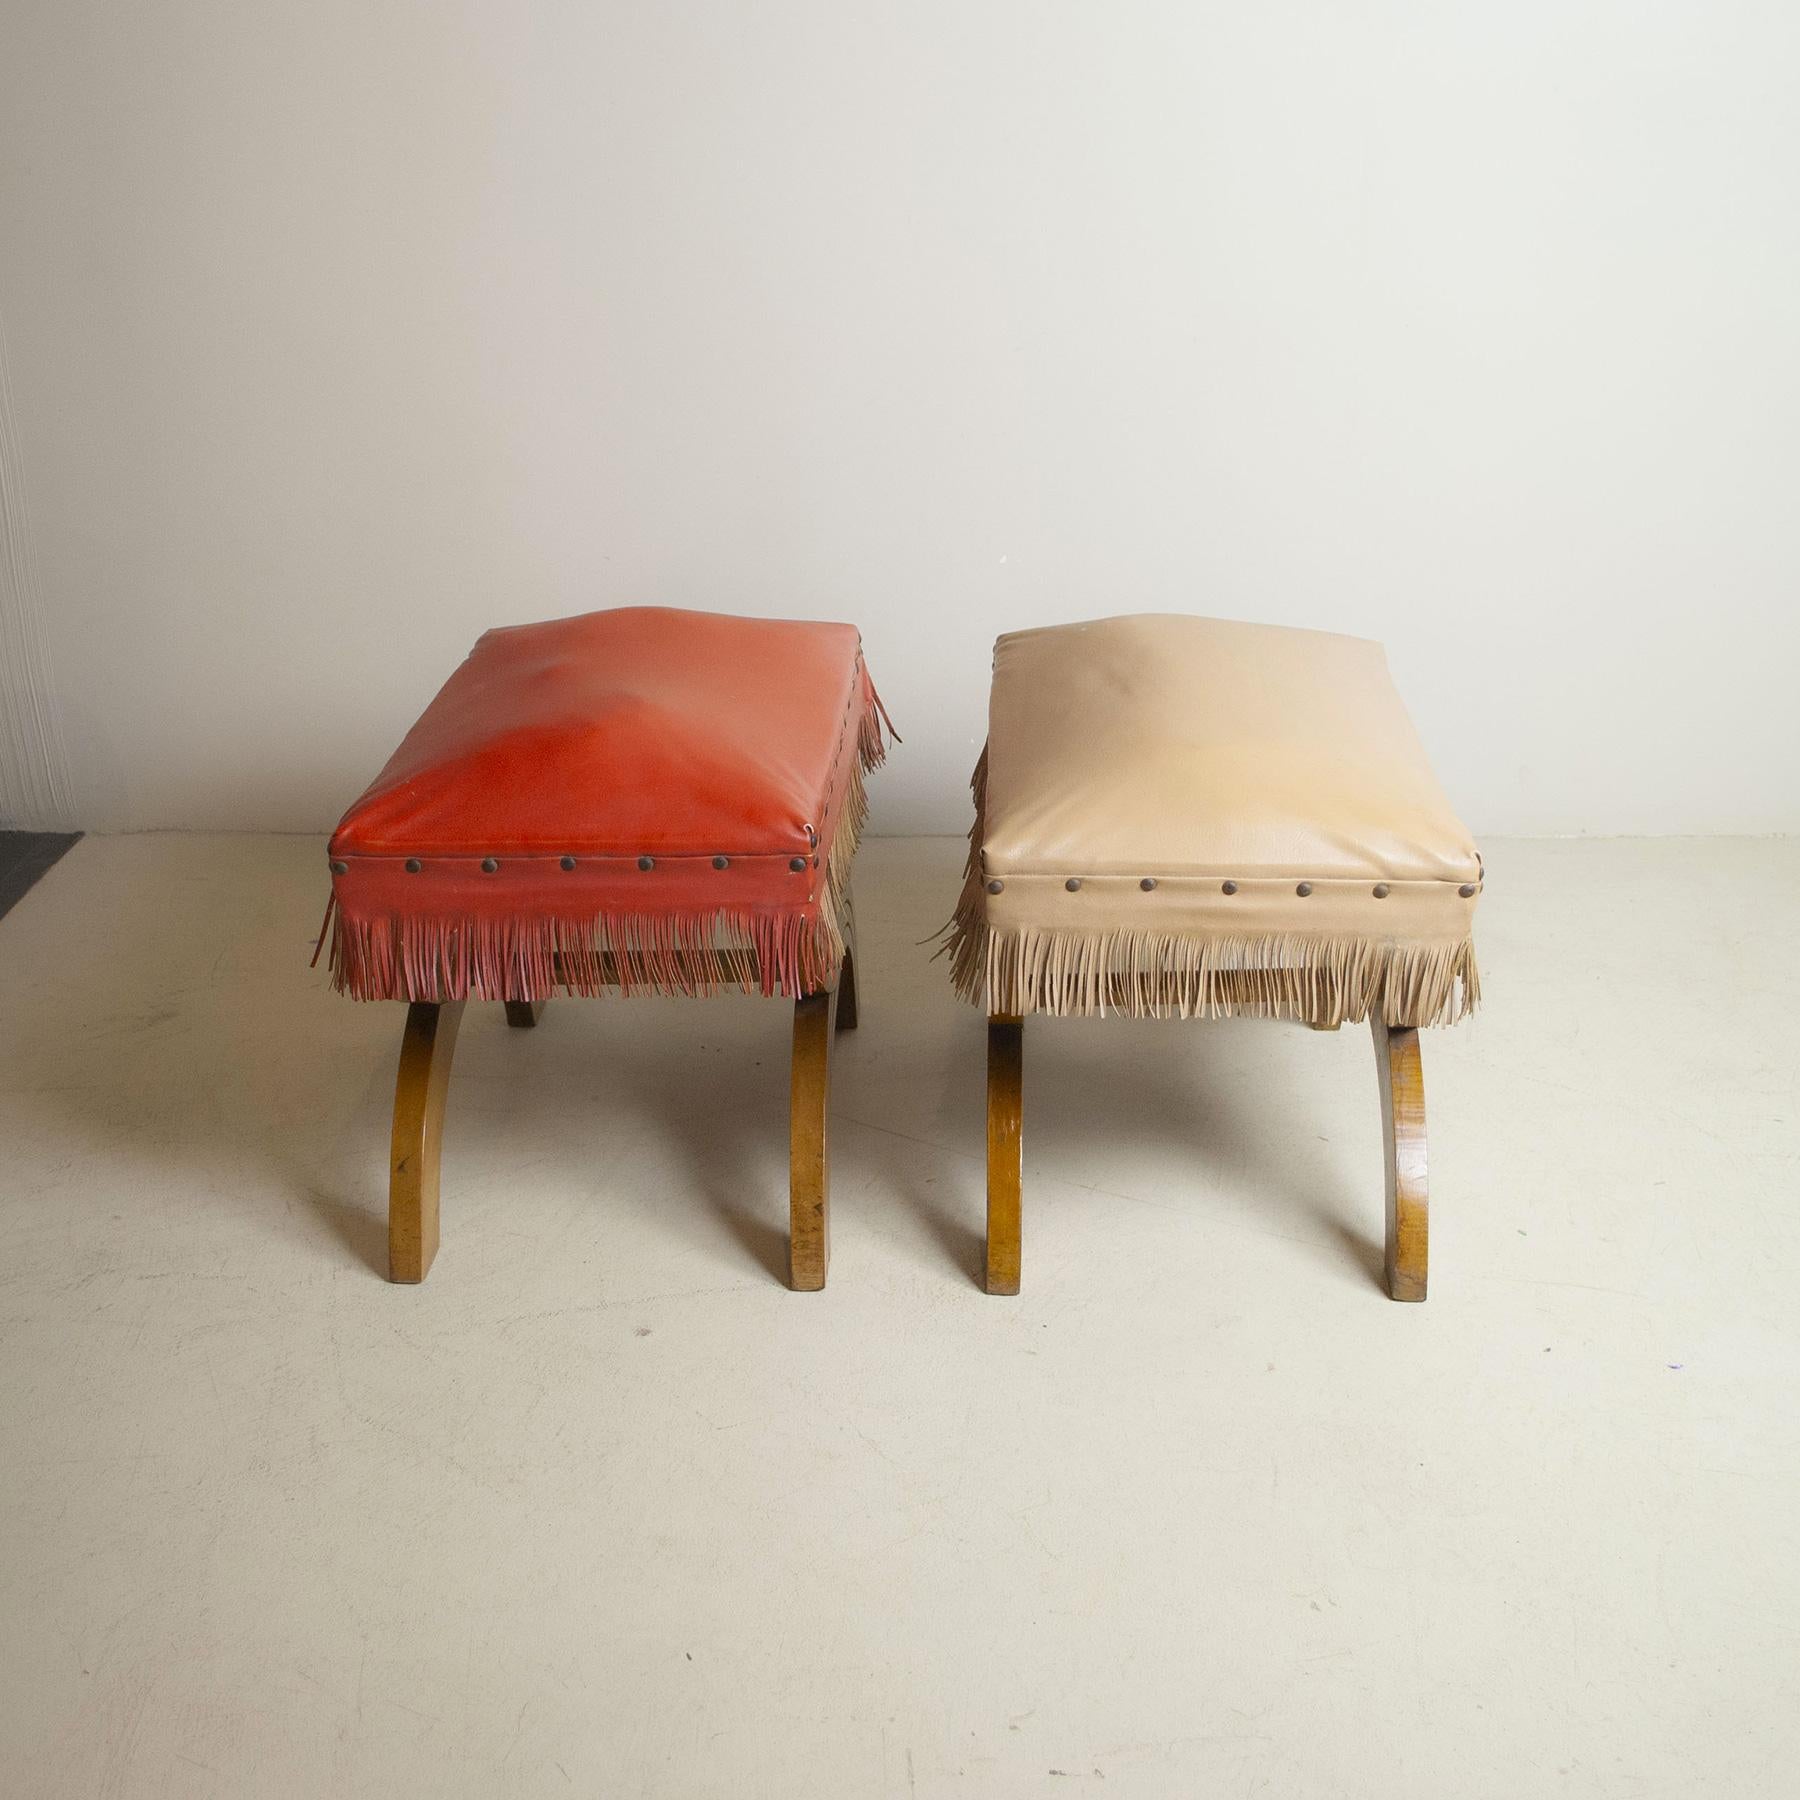 Mid-20th Century Gio Ponti in the Style Pair of Wooden Stools from the 1960s For Sale